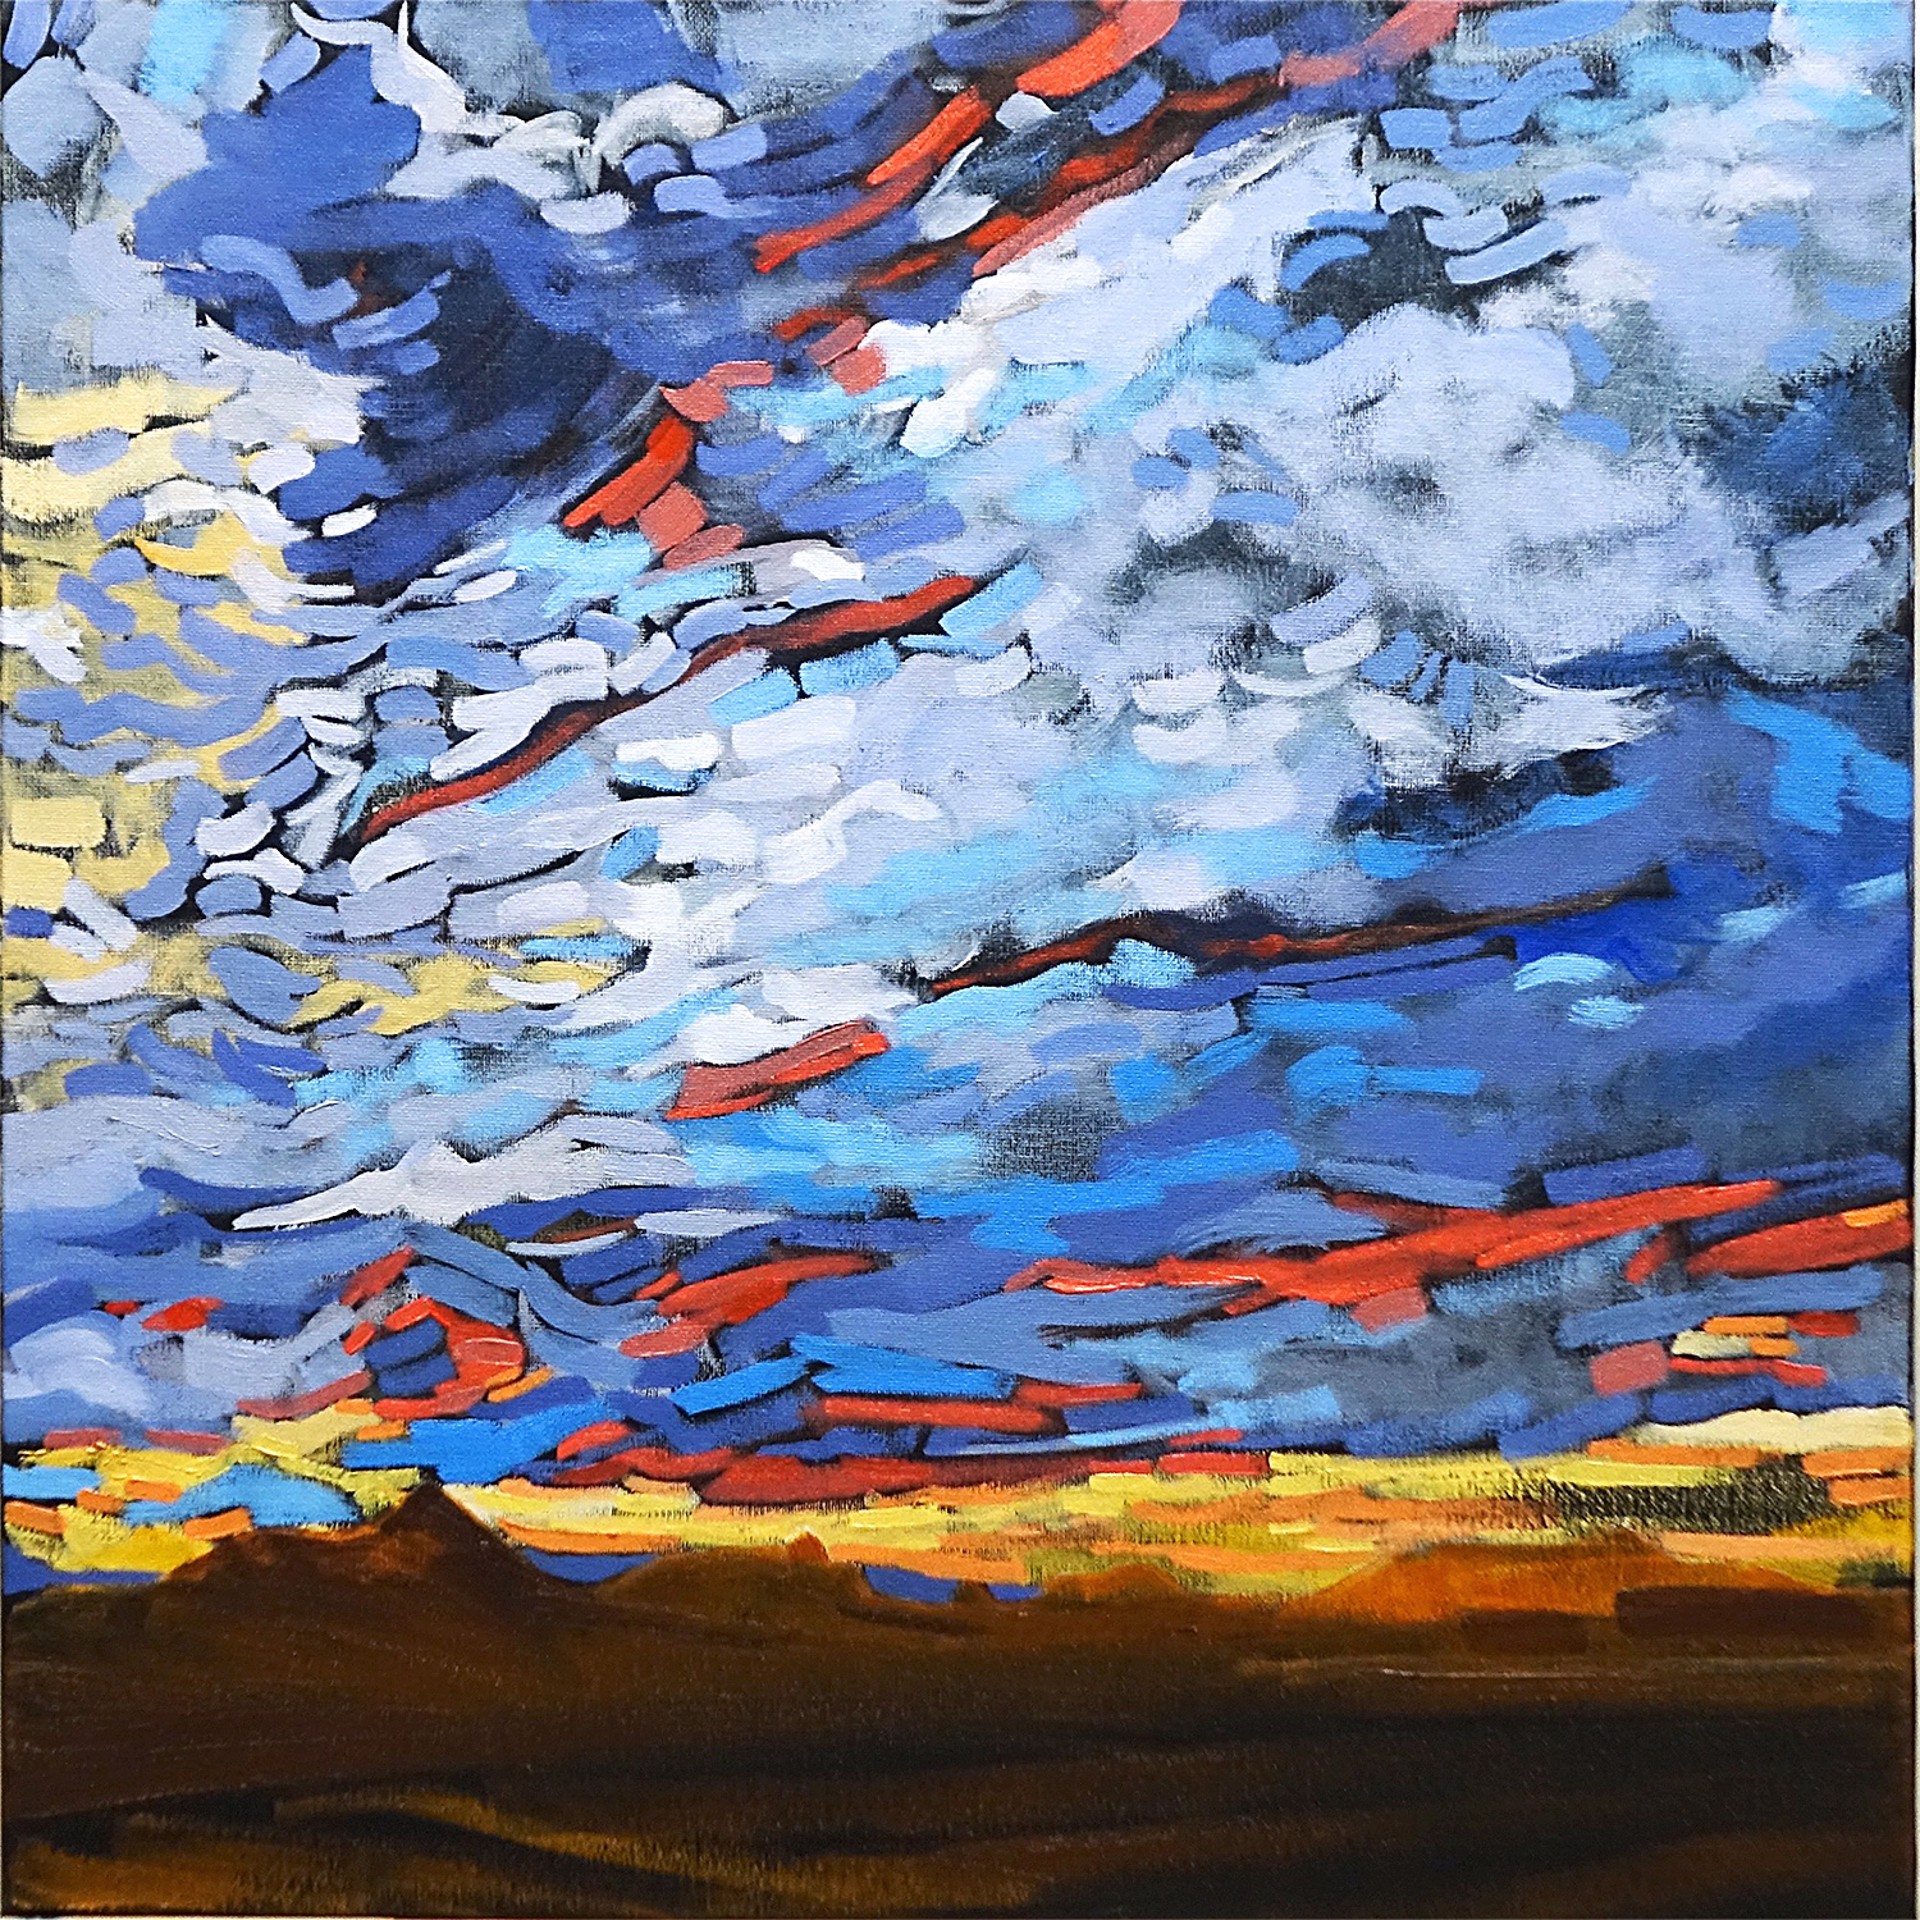 Sunrise and Storm Clouds by M.E. Price